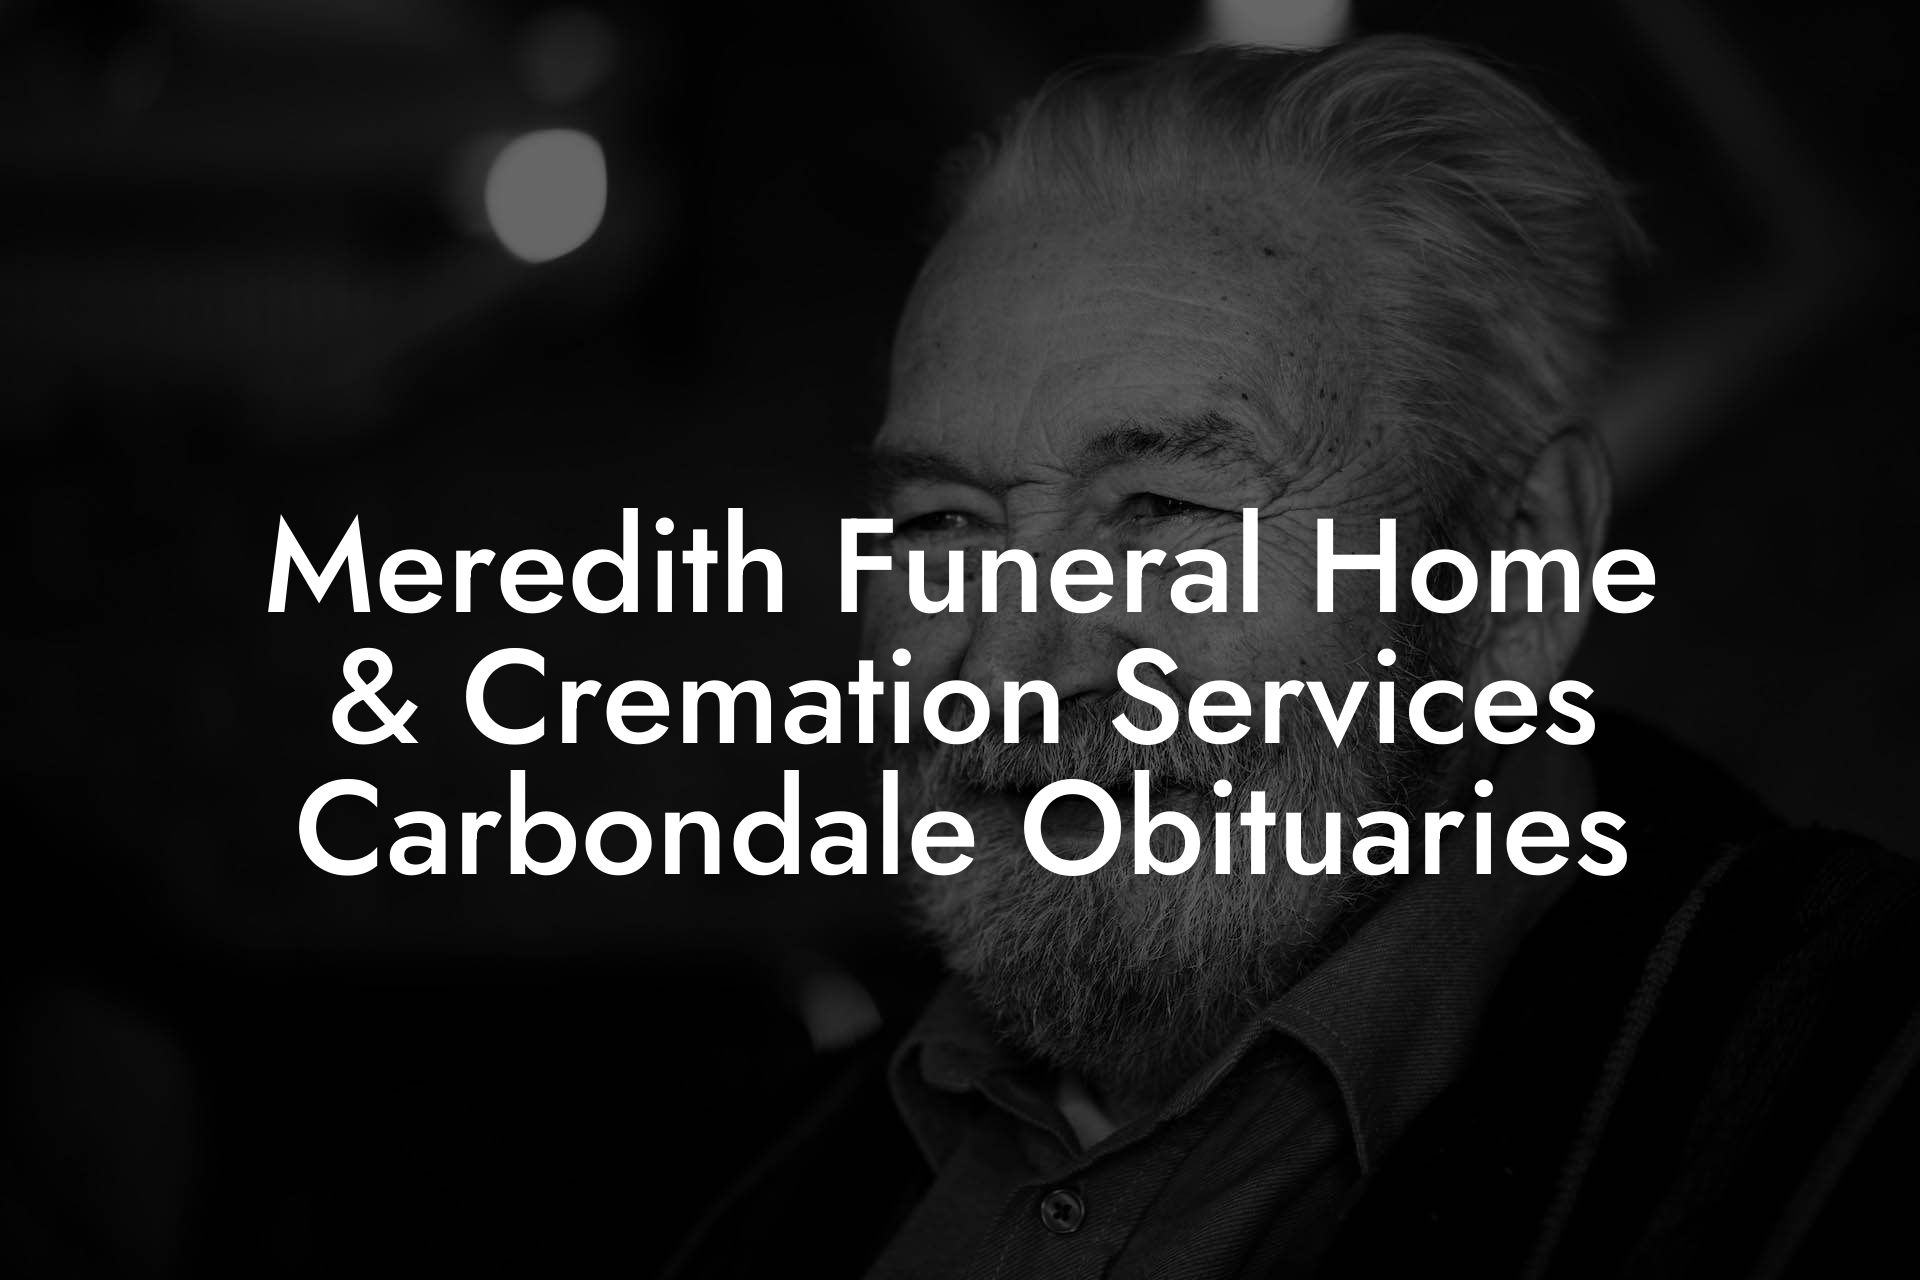 Meredith Funeral Home & Cremation Services Carbondale Obituaries